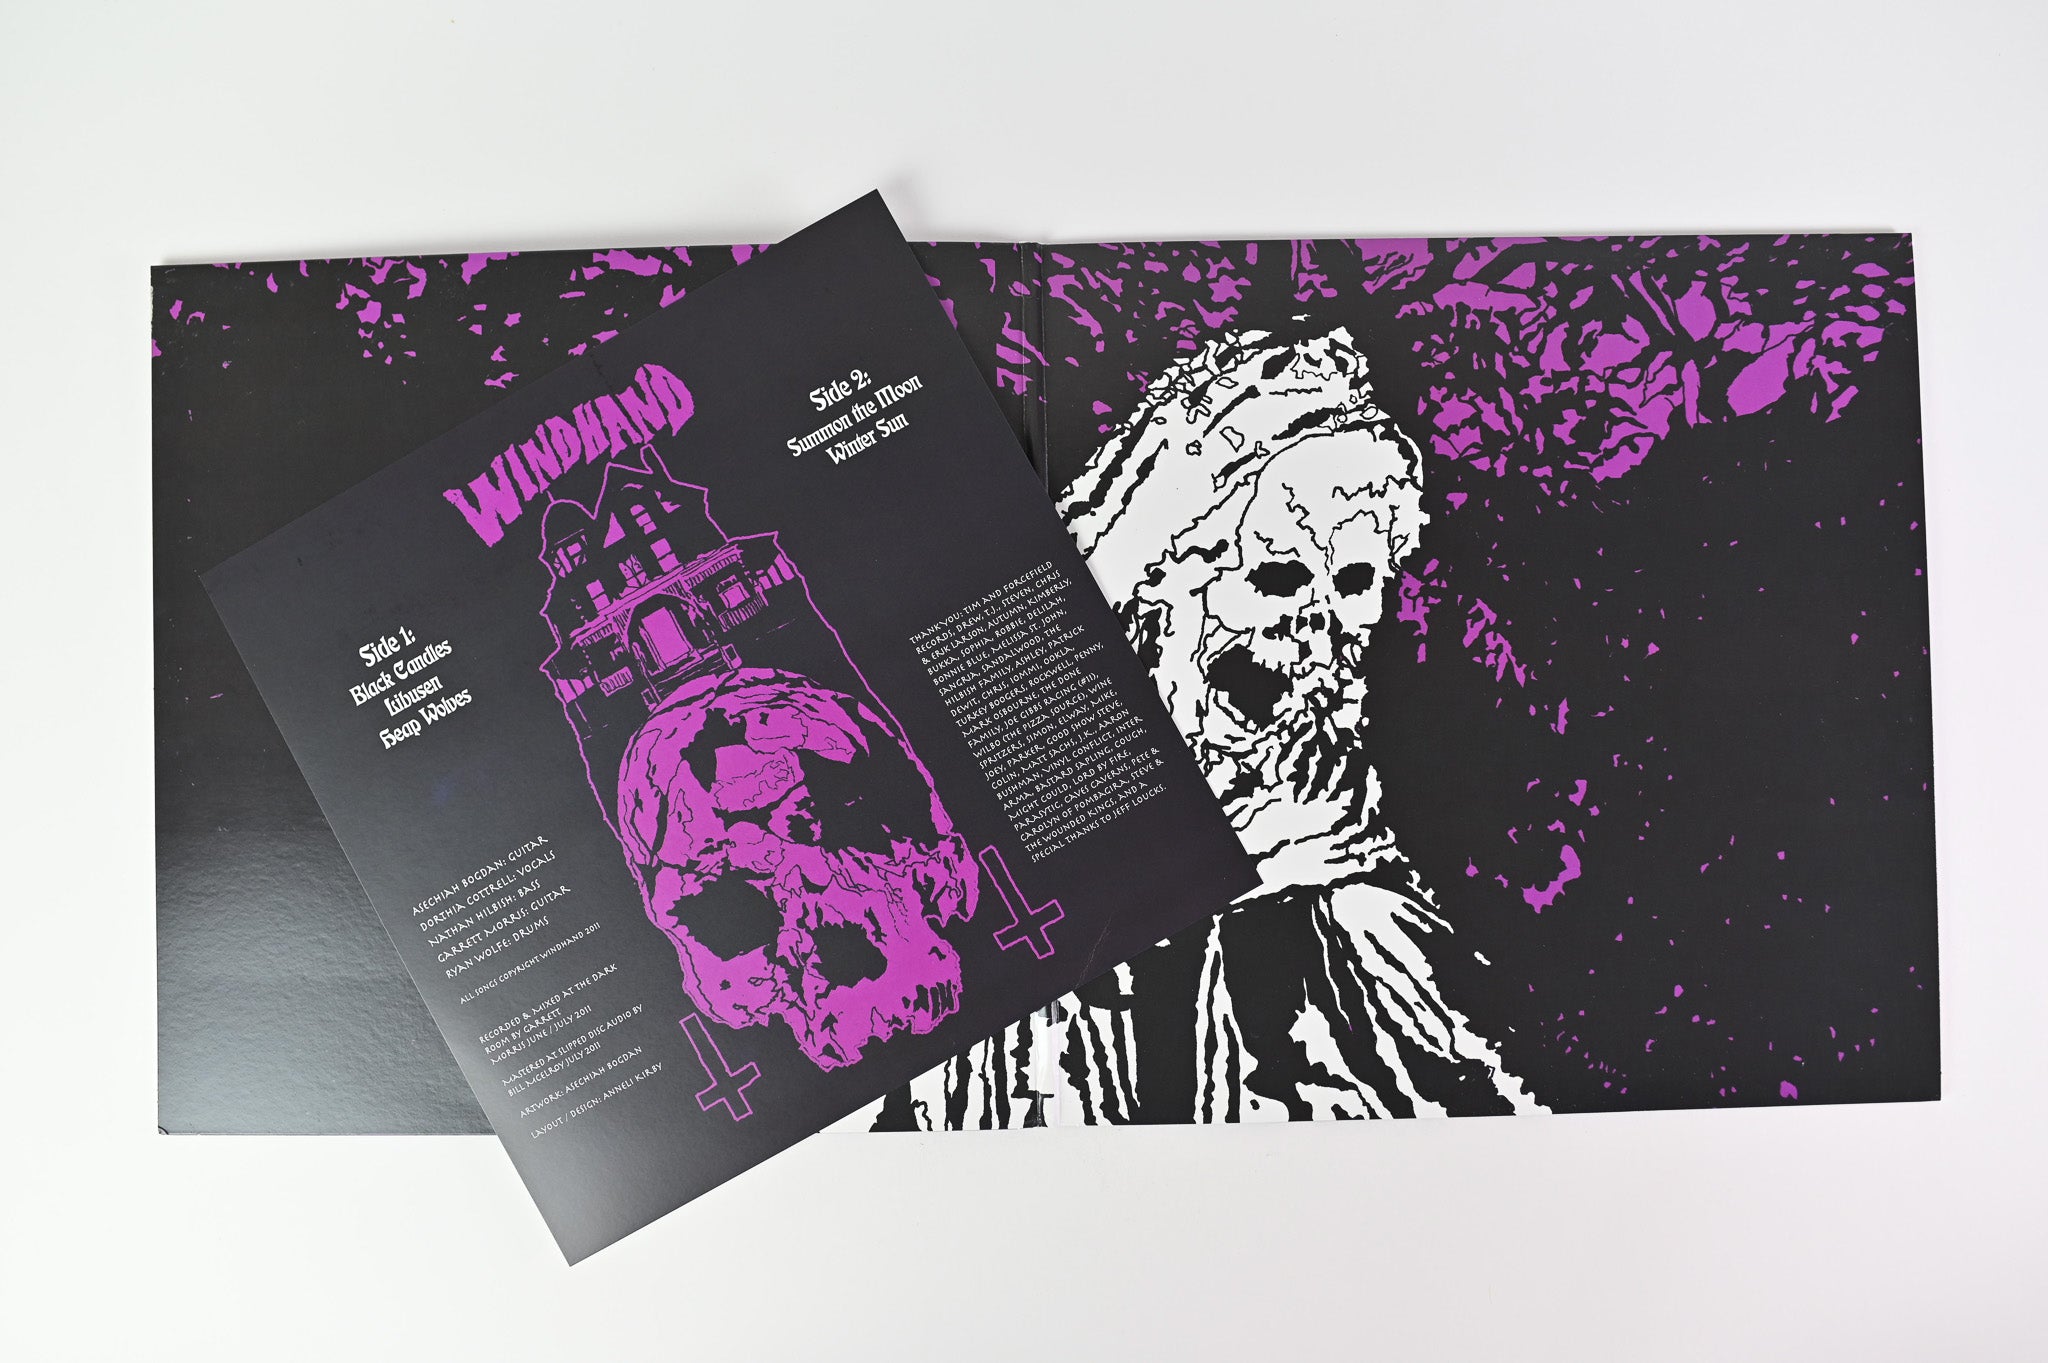 Windhand - Windhand on Forcefield Ltd Black / Purple Marbled